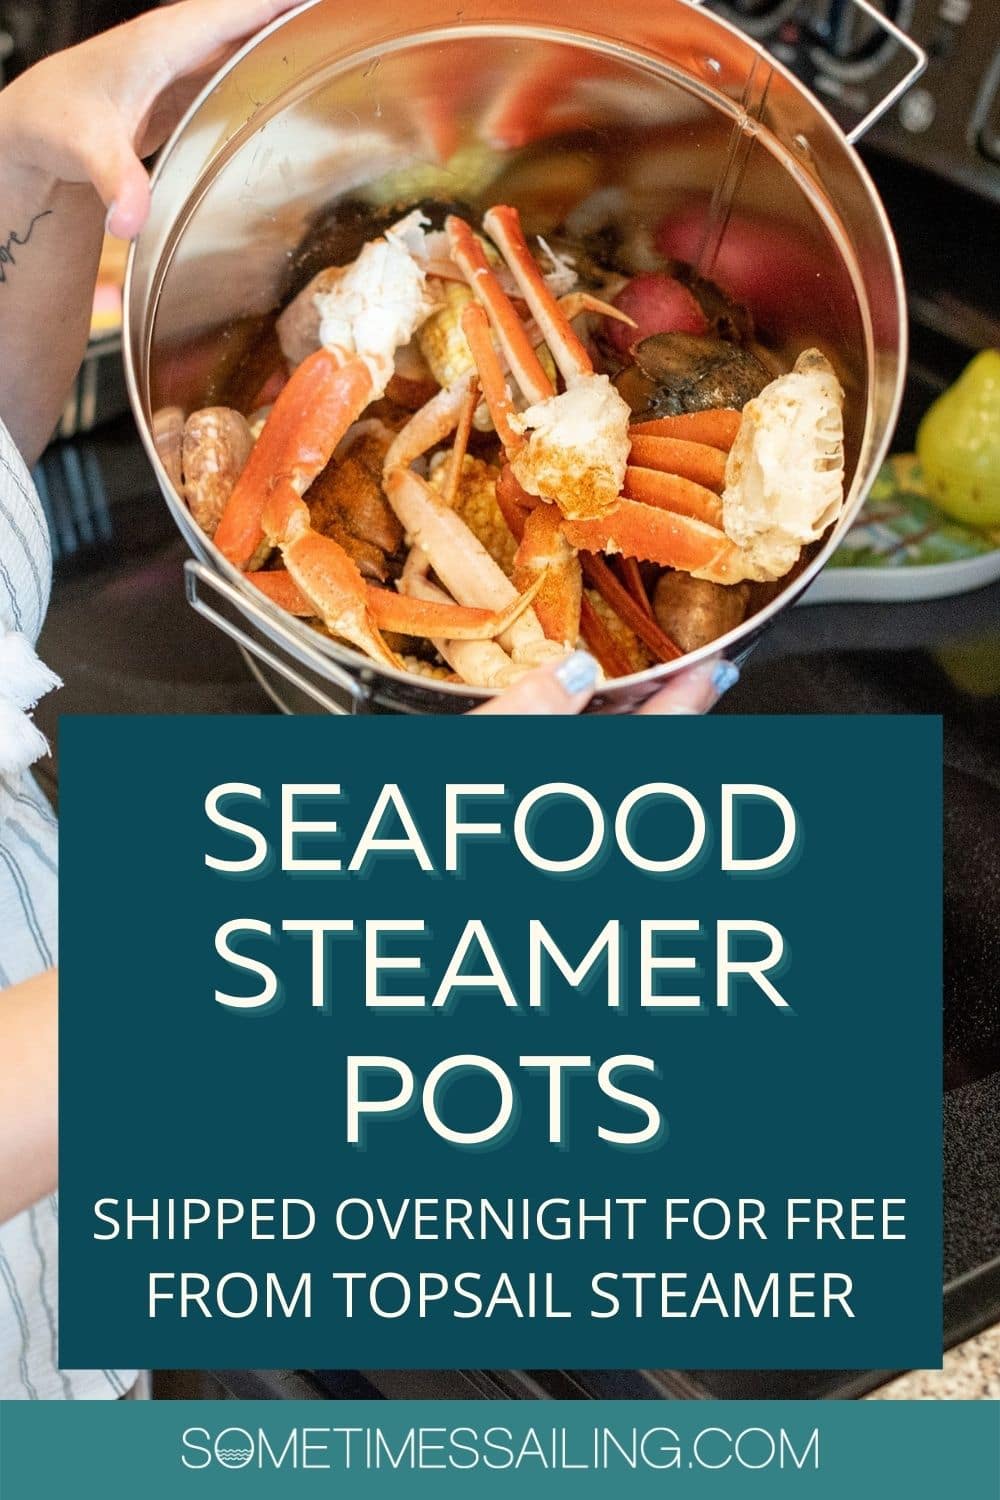 Pinterest graphic for Seafood Steamer Pots that ship overnight for free from Topsail Steamer.